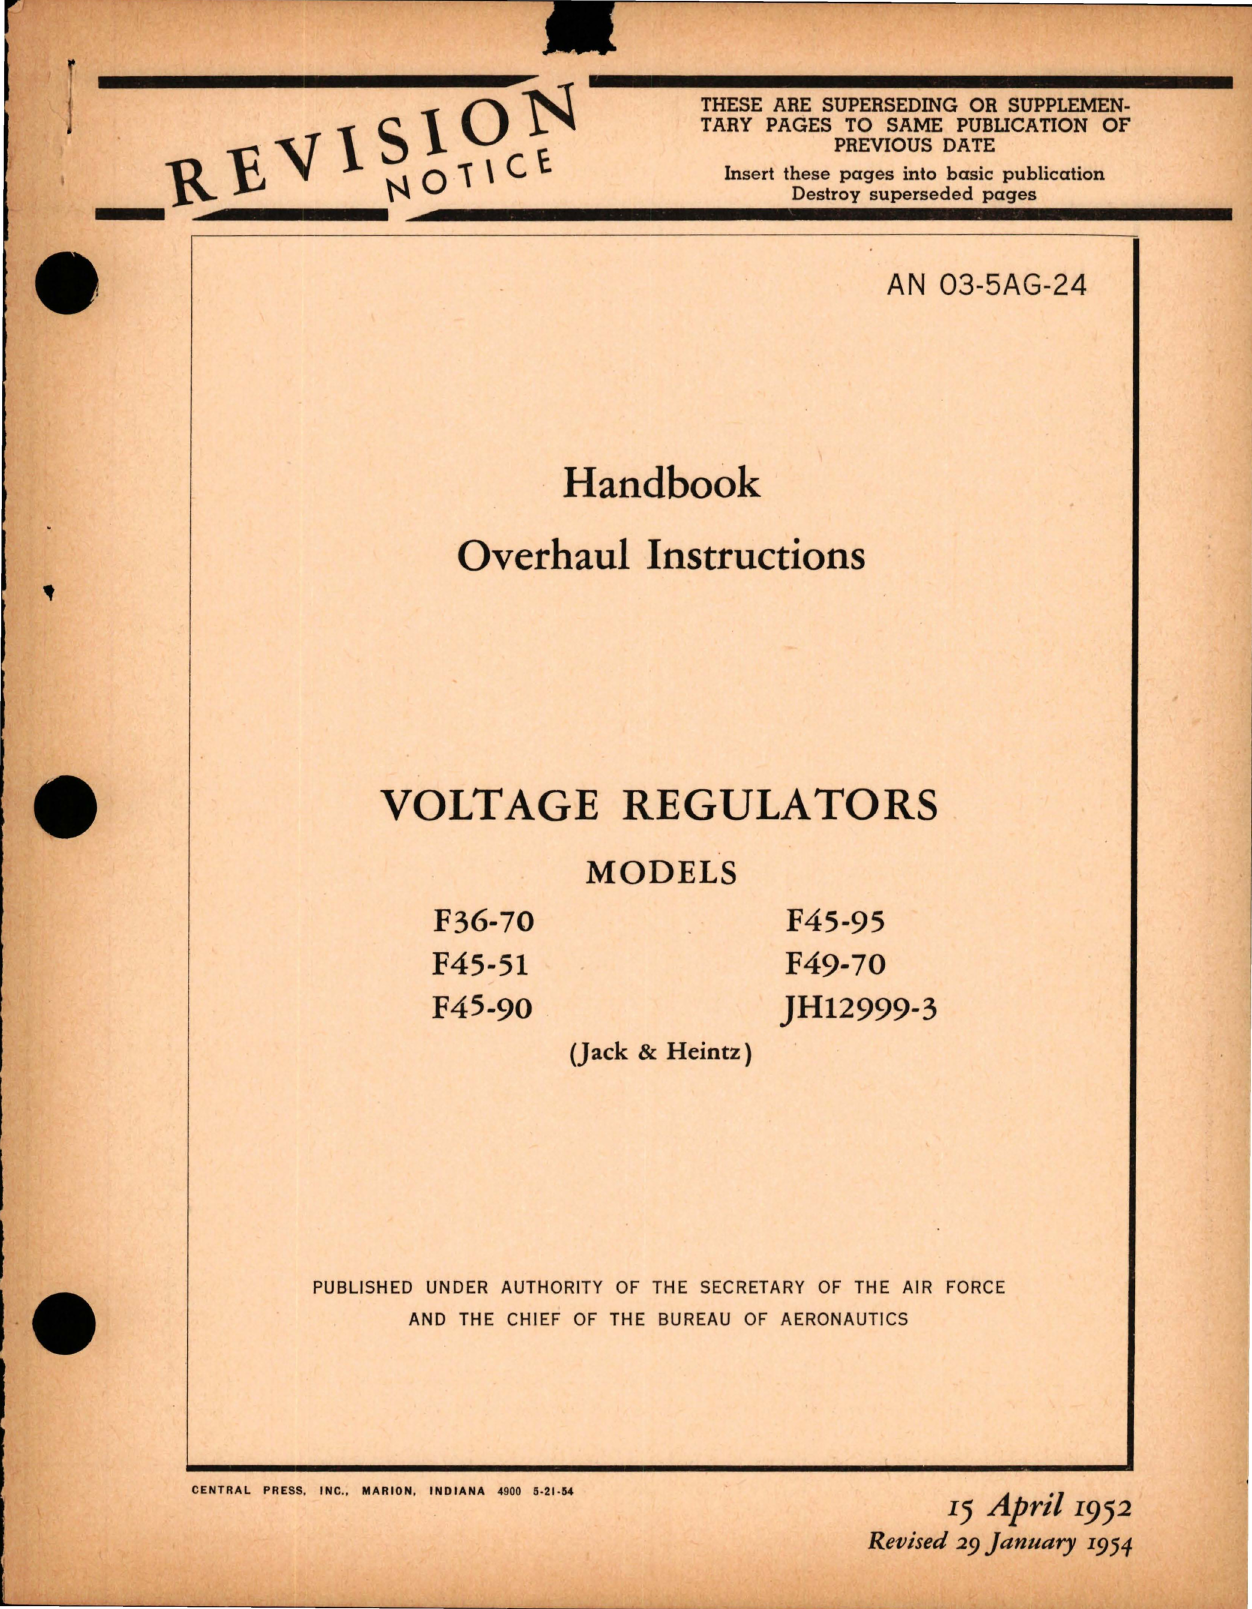 Sample page 1 from AirCorps Library document: Overhaul Instructions for Voltage Regulators - Models F36-70, F45-51, F45-90, F45-95, F49-70, and JH12999-3